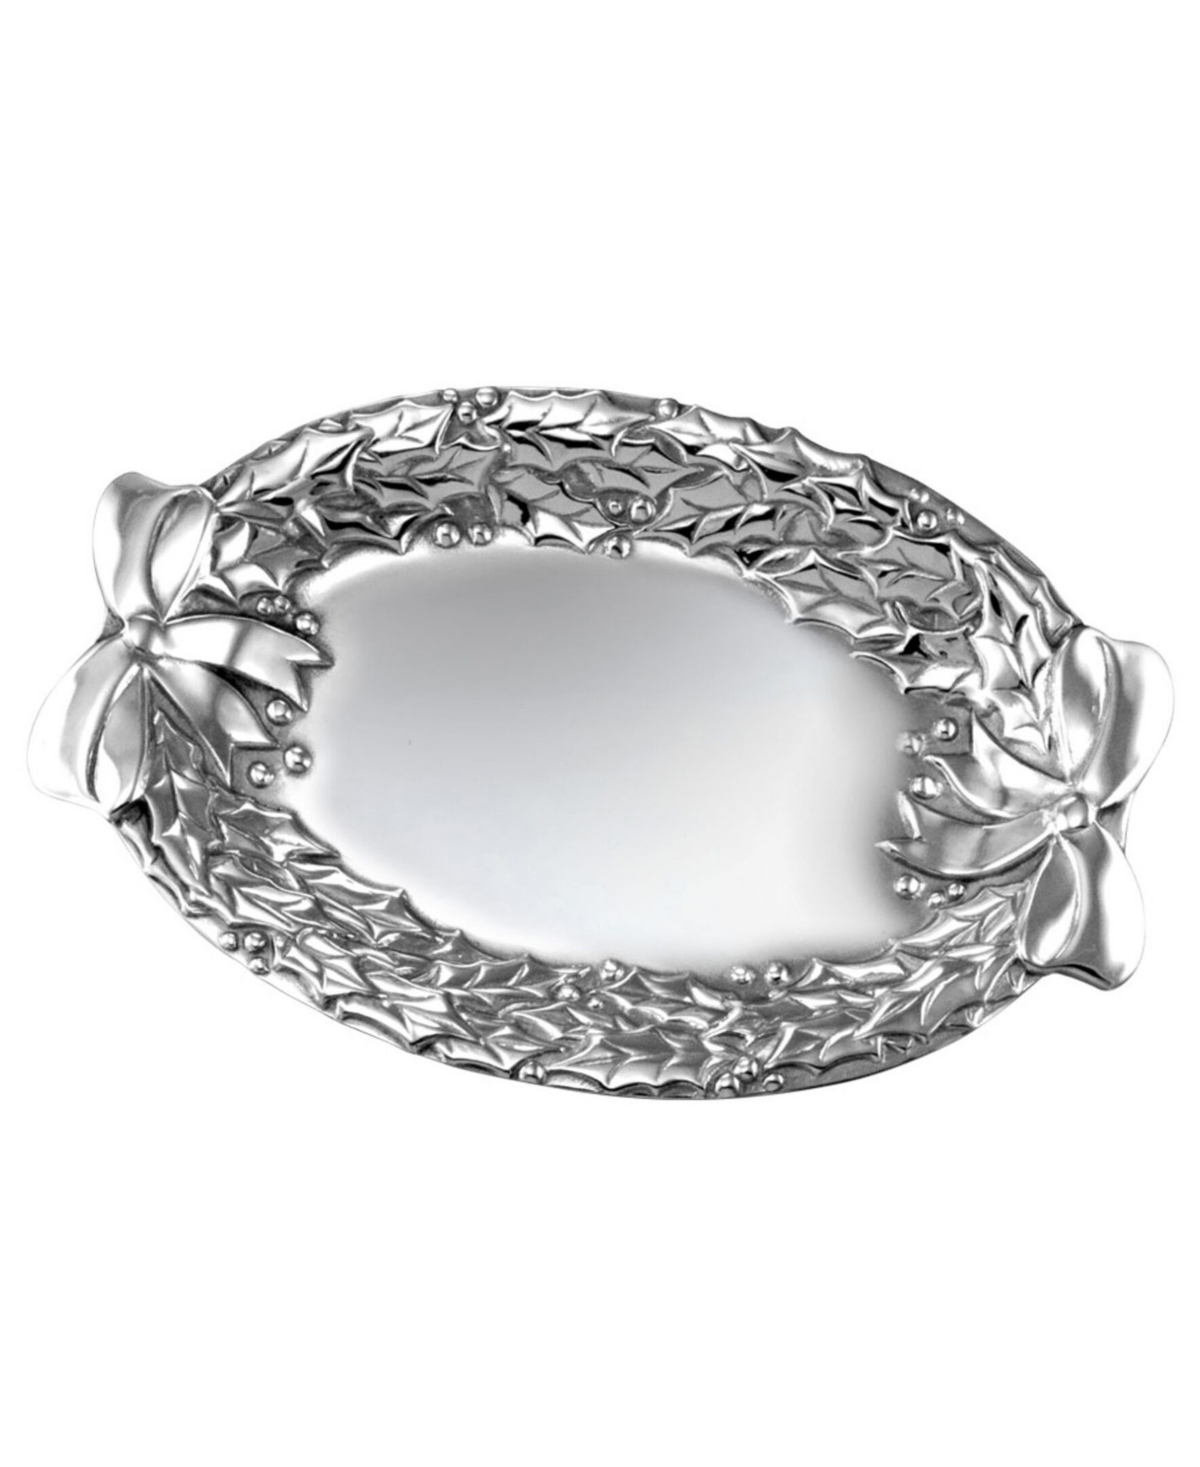 Wilton Armetale Holly Berries Oval Tray In Silver